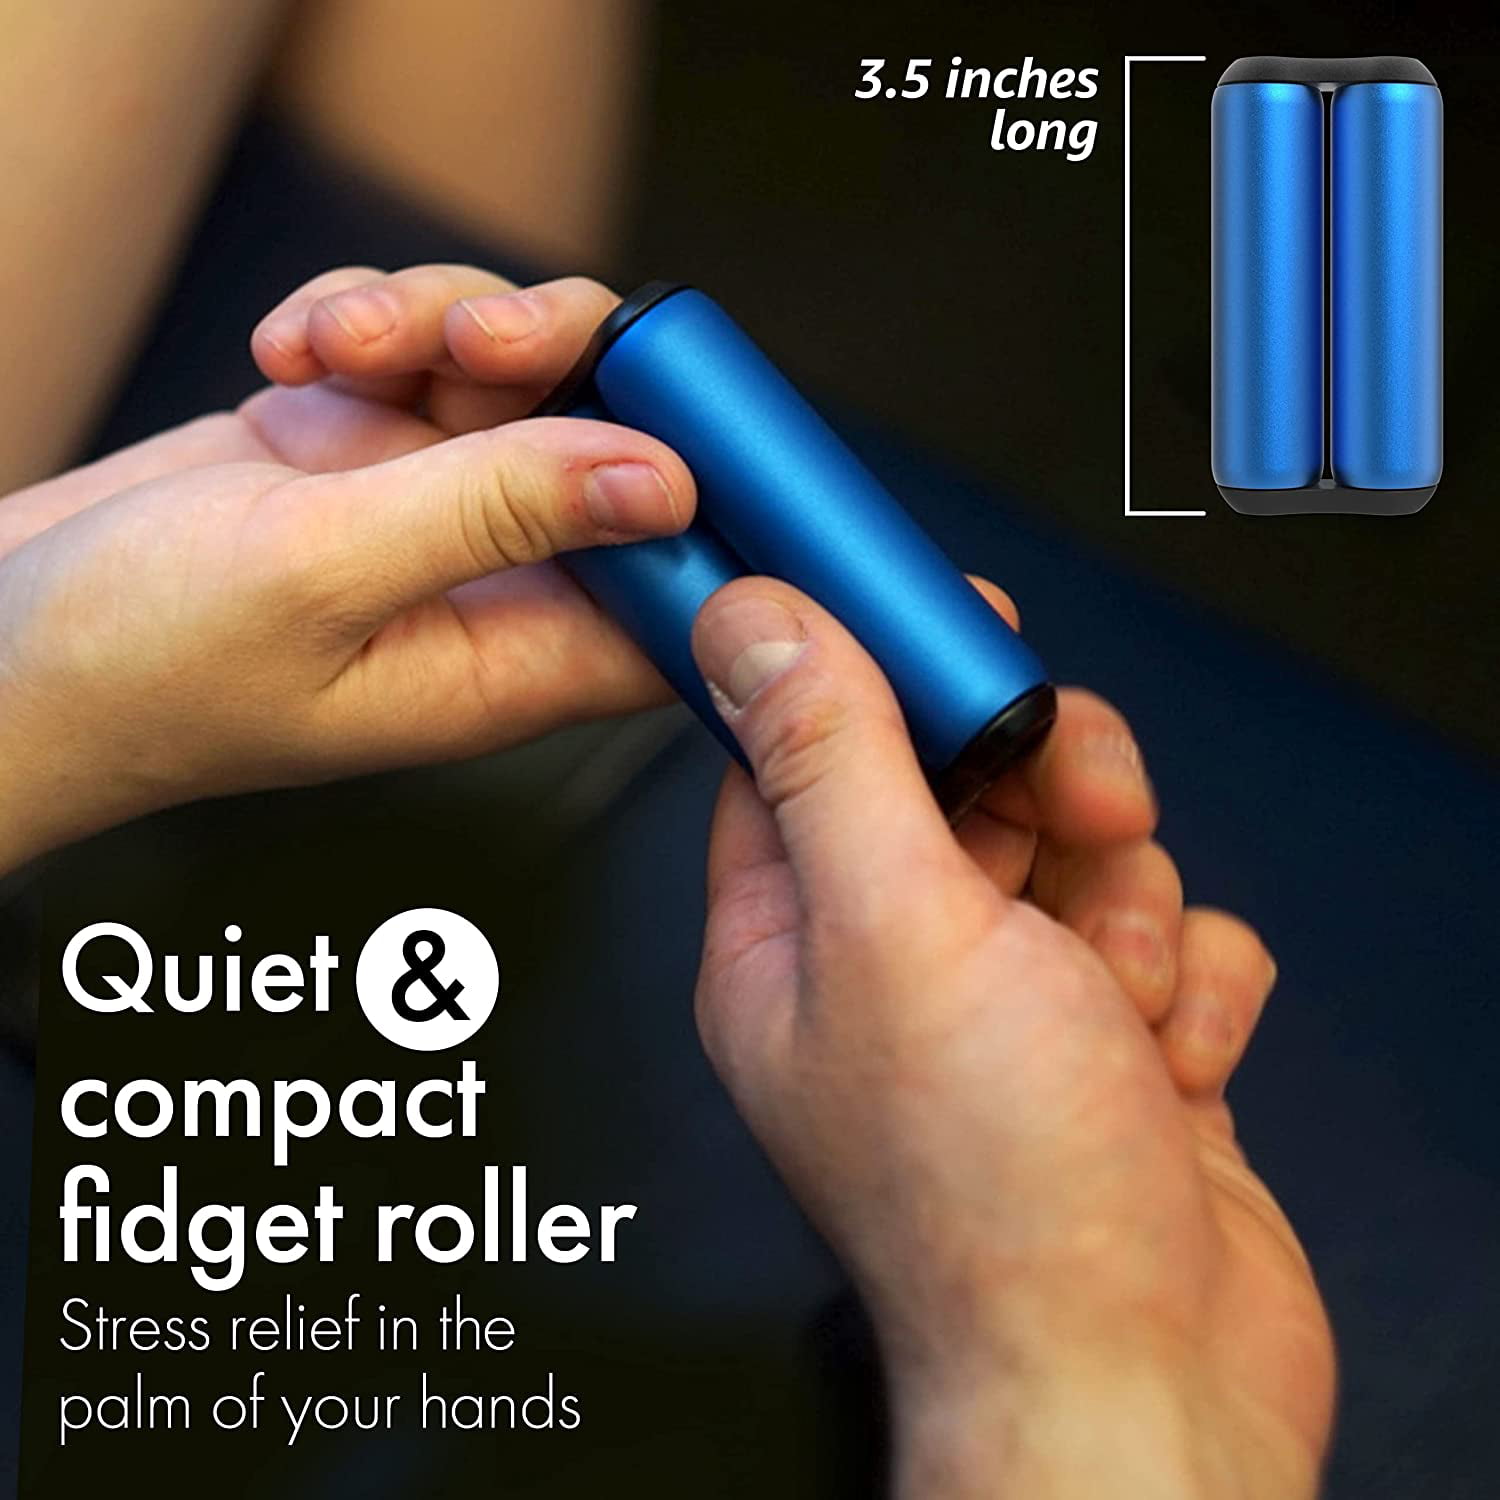 Sapphire ONO Roller - (The Original) Handheld Fidget Toy for Adults | Help  Relieve Stress, Anxiety, Tension | Promotes Focus, Clarity | Compact